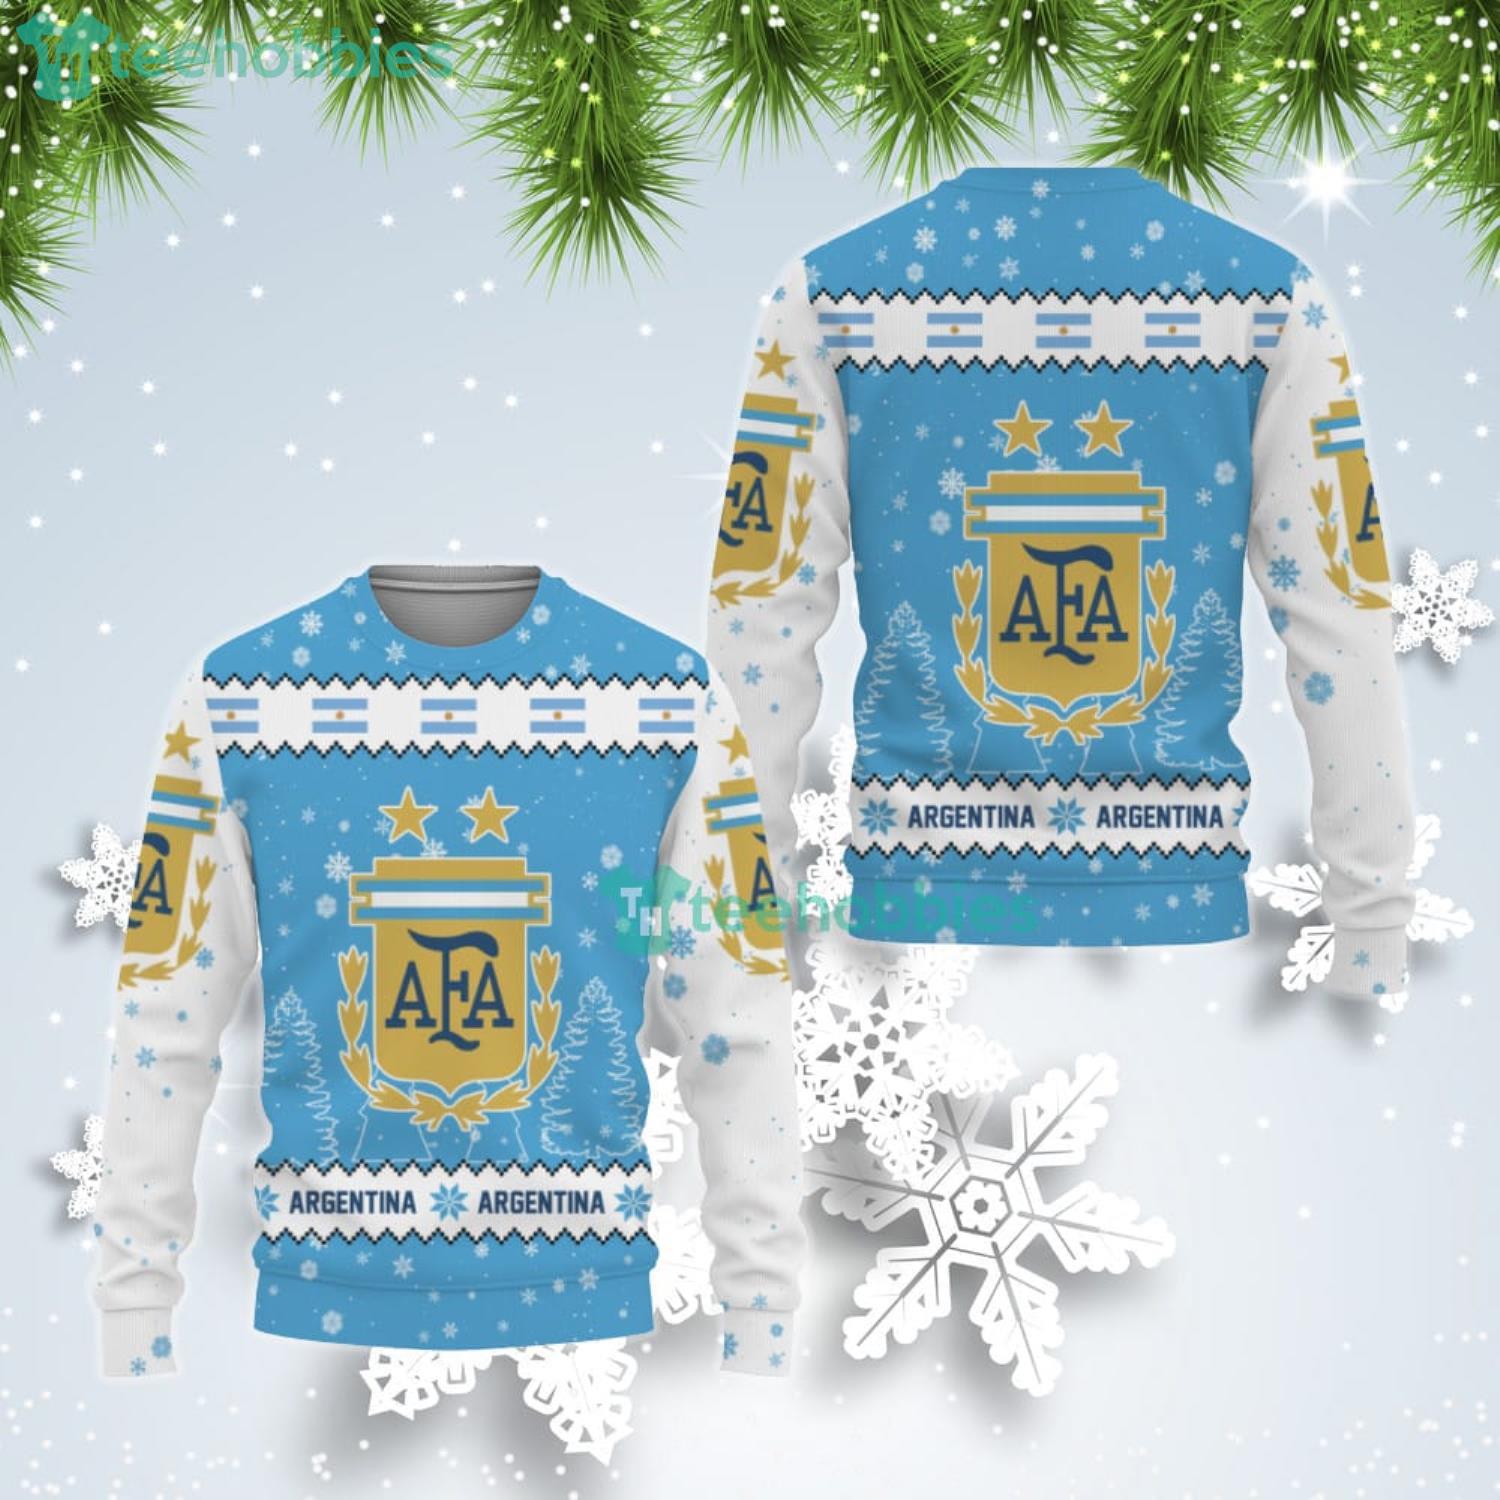 Argentina National Soccer Team Qatar World Cup 2022 Winter Season Ugly Christmas Sweater Product Photo 1